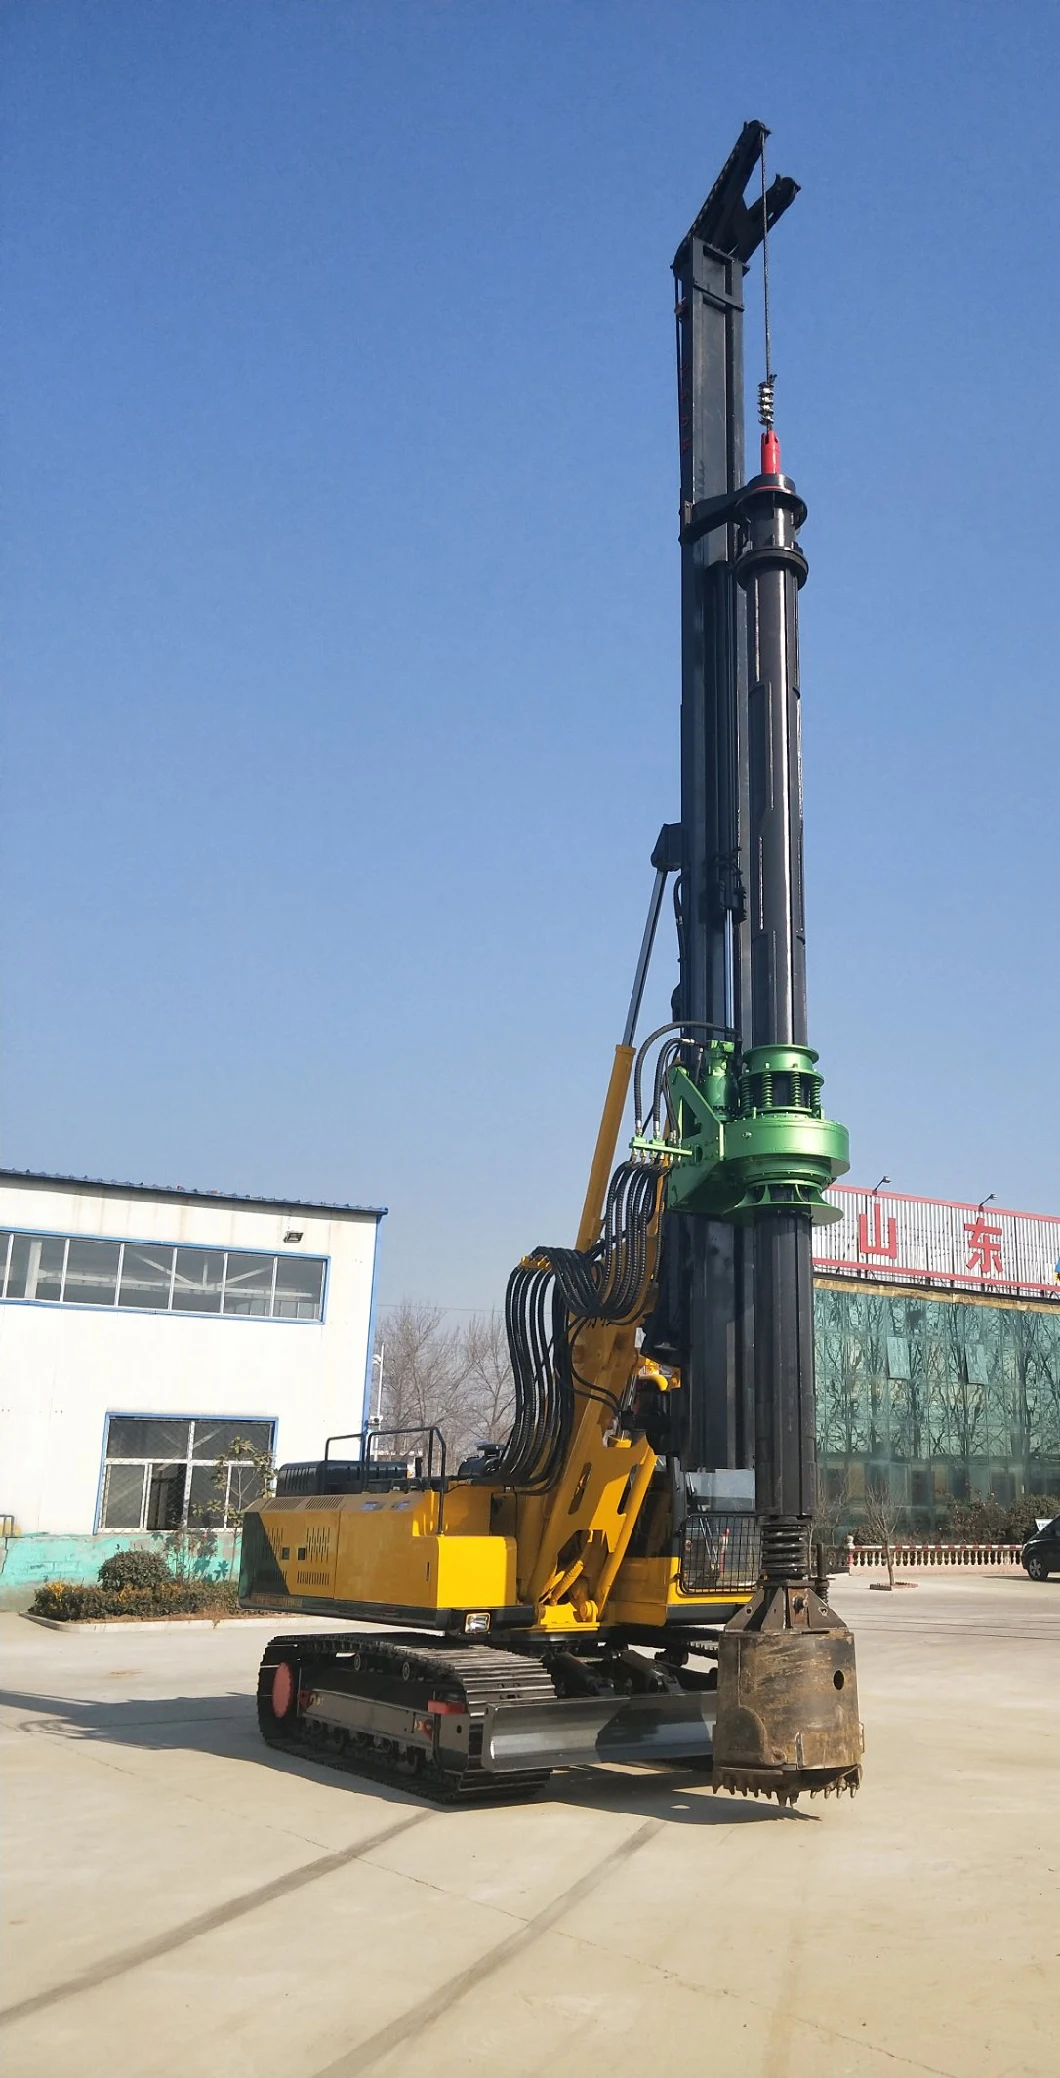 25m Deep Rotary Hydraulic Water Well Drilling Rig Machine for Mud and DTH Borehole Drilling